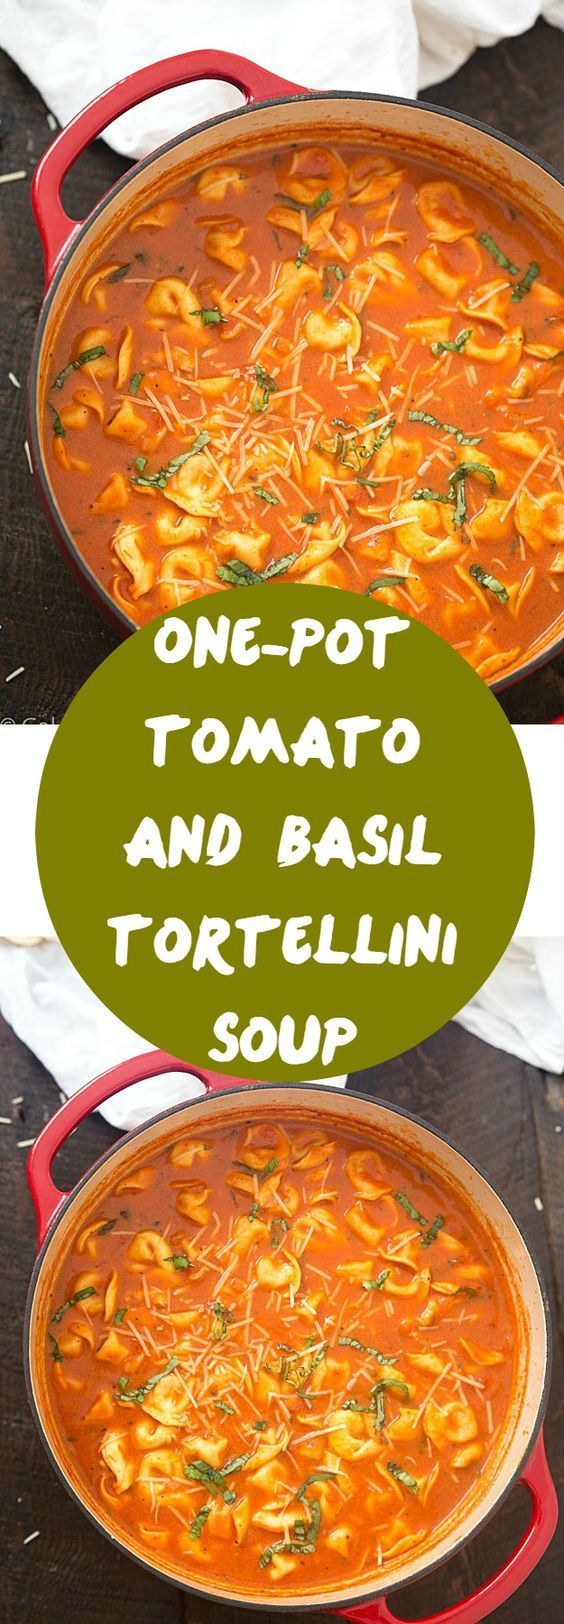 One-Pot Tomato and Basil Tortellini Soup - Hearty, comforting, flavorful and a quick weeknight meal! So much easier than soup in the crock-pot! -   23 fall dinner recipes
 ideas